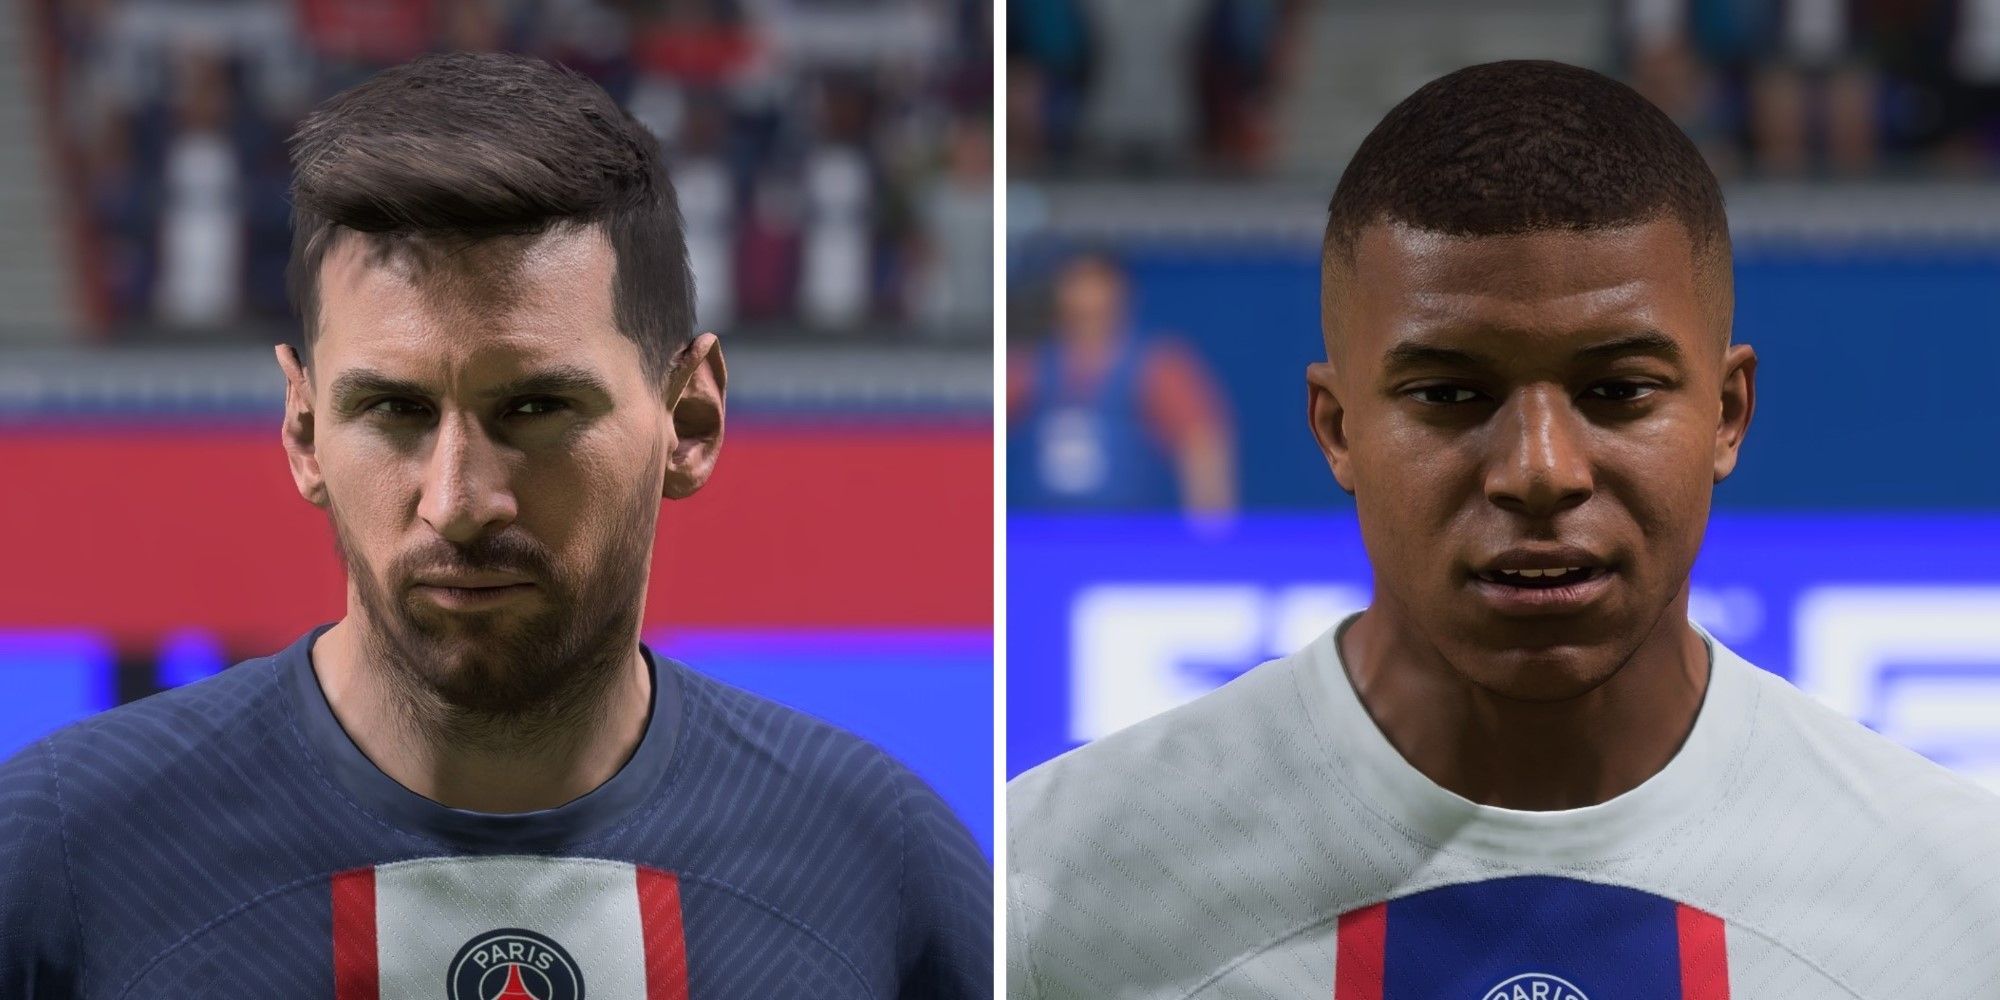 An image of Lionel Messi and Kylian Mbappe in FIFA 23